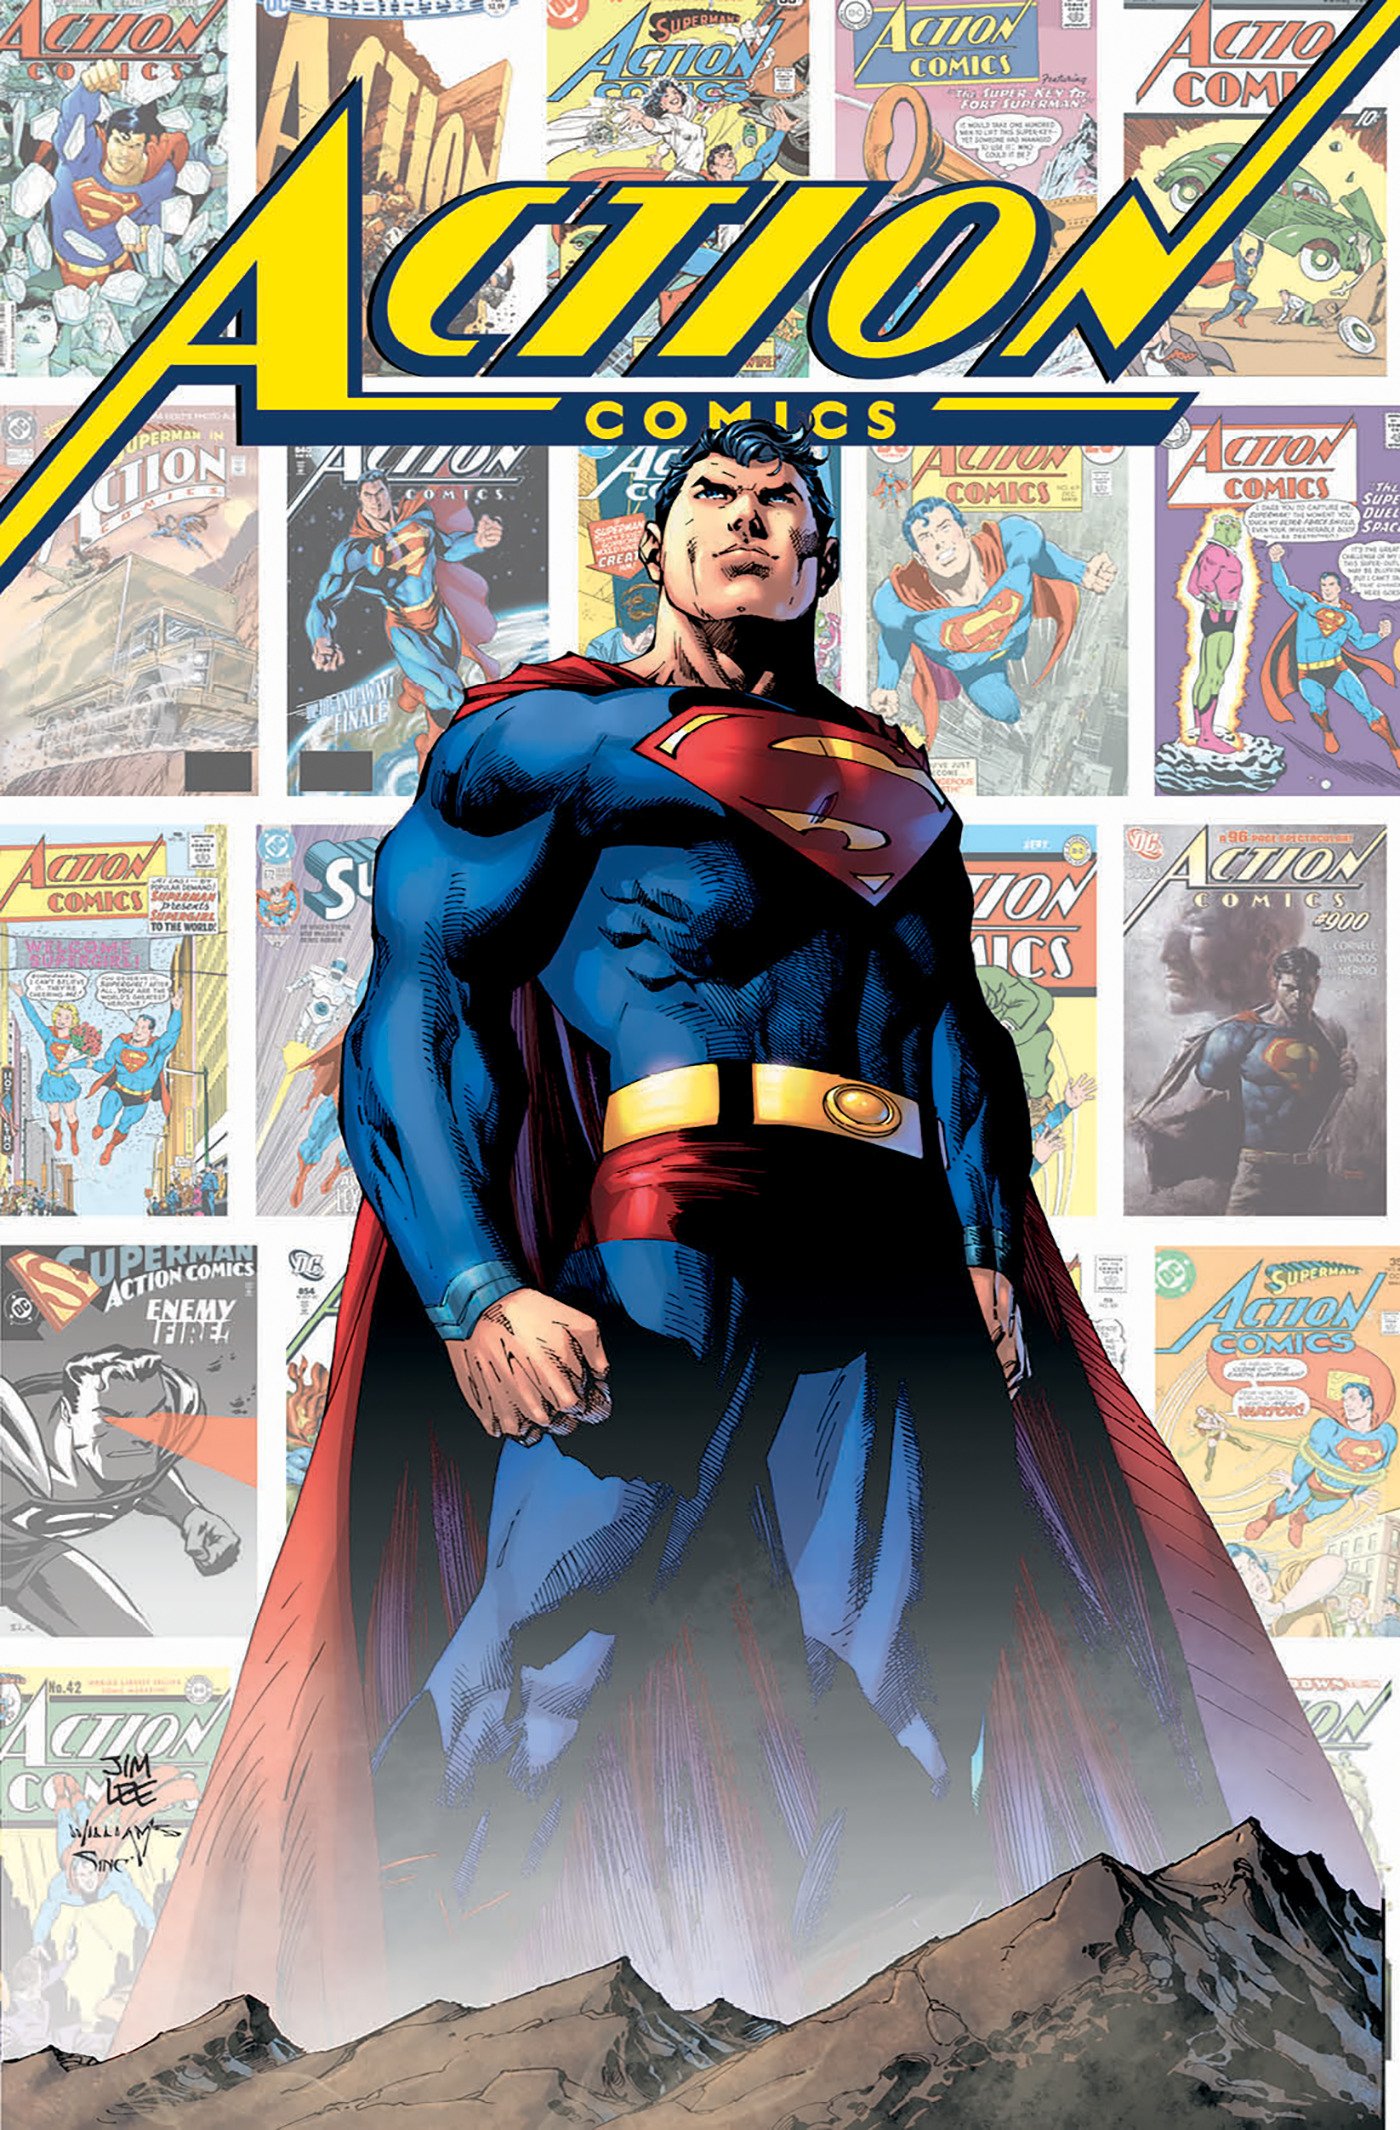 Action Comics 80 Years of Superman: The Deluxe Edition — Open Letters Review